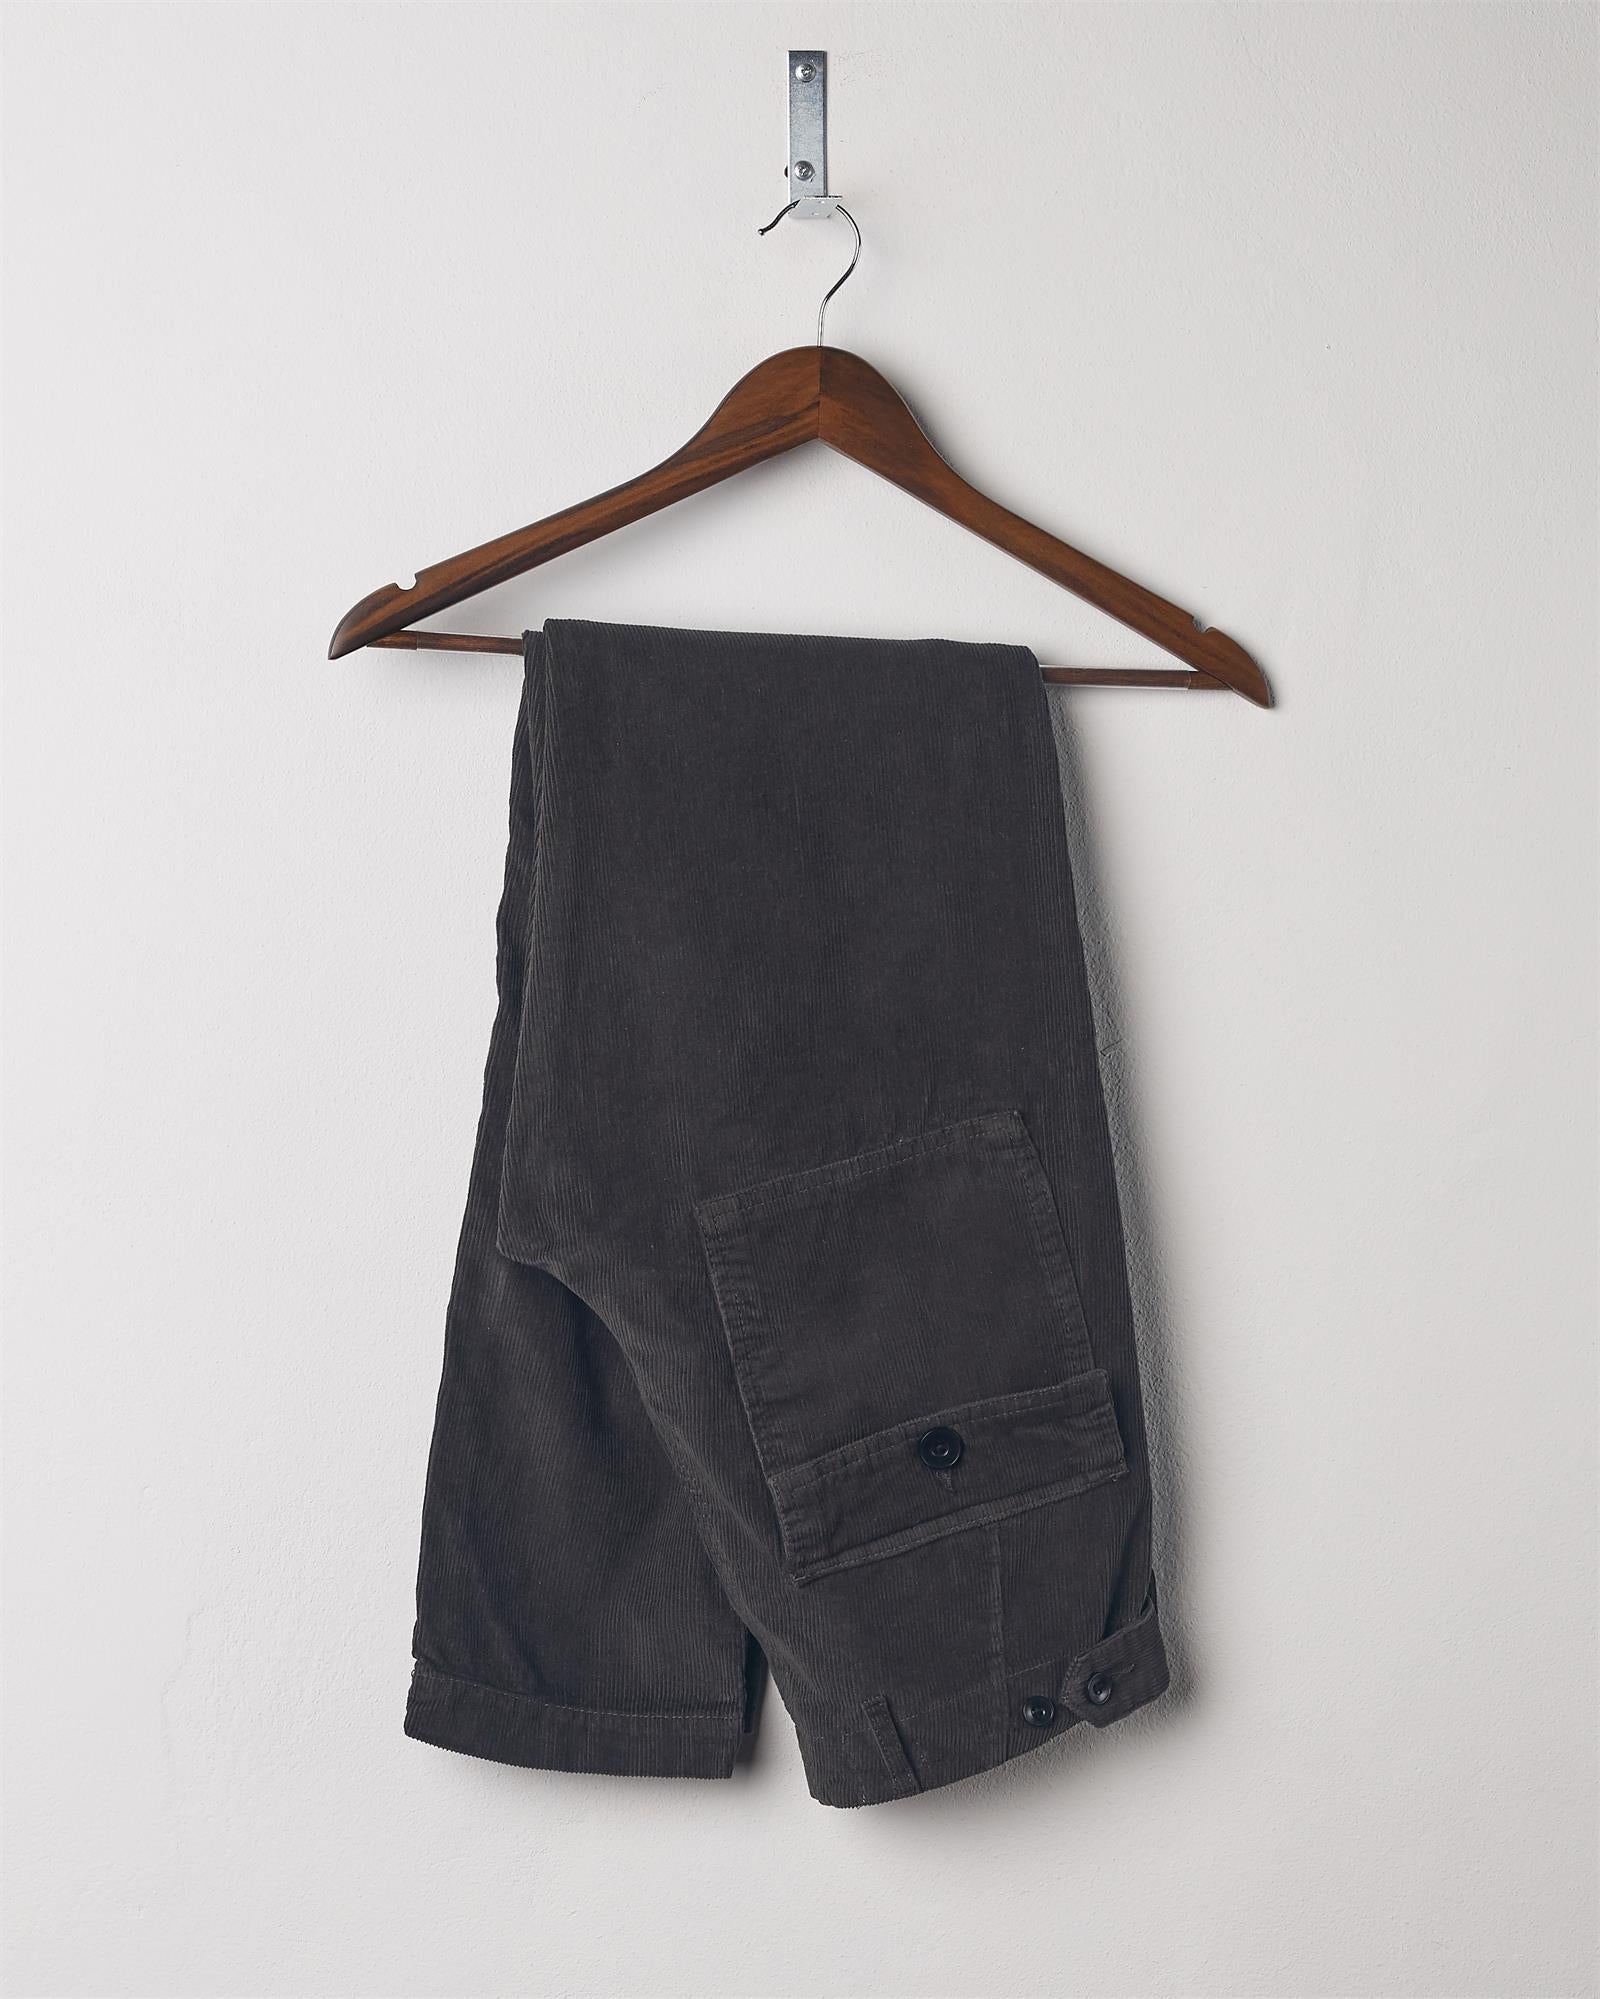 Folded hanging shot of #5005 Uskees men's organic cord 'faded black' casual trousers.